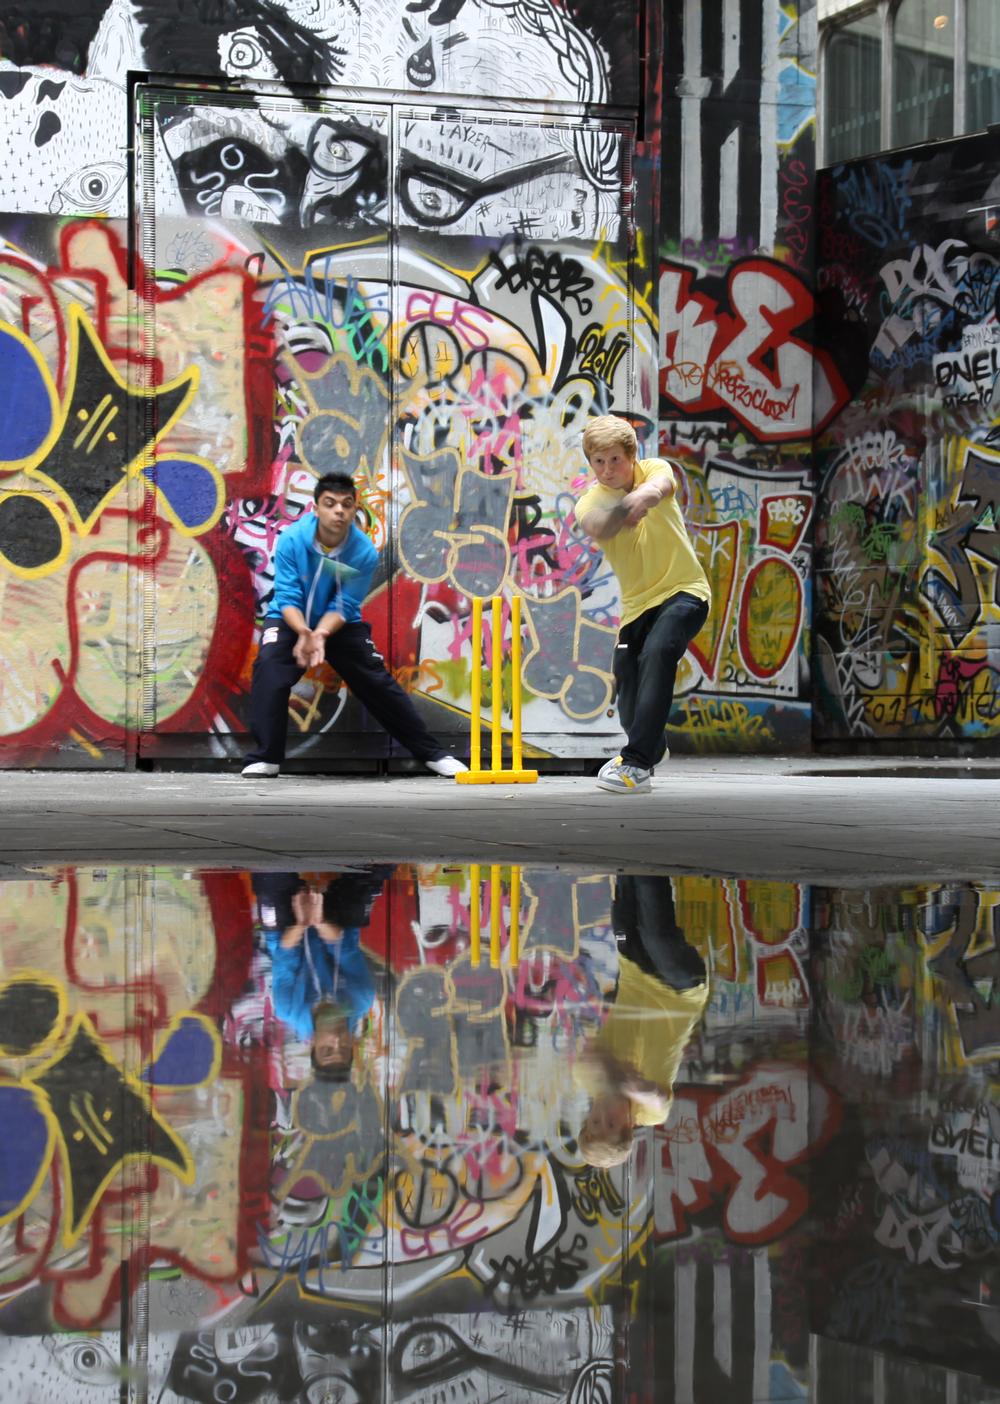 Channeling energies into positive action: kids play cricket in Southend / @TheChangeFdn